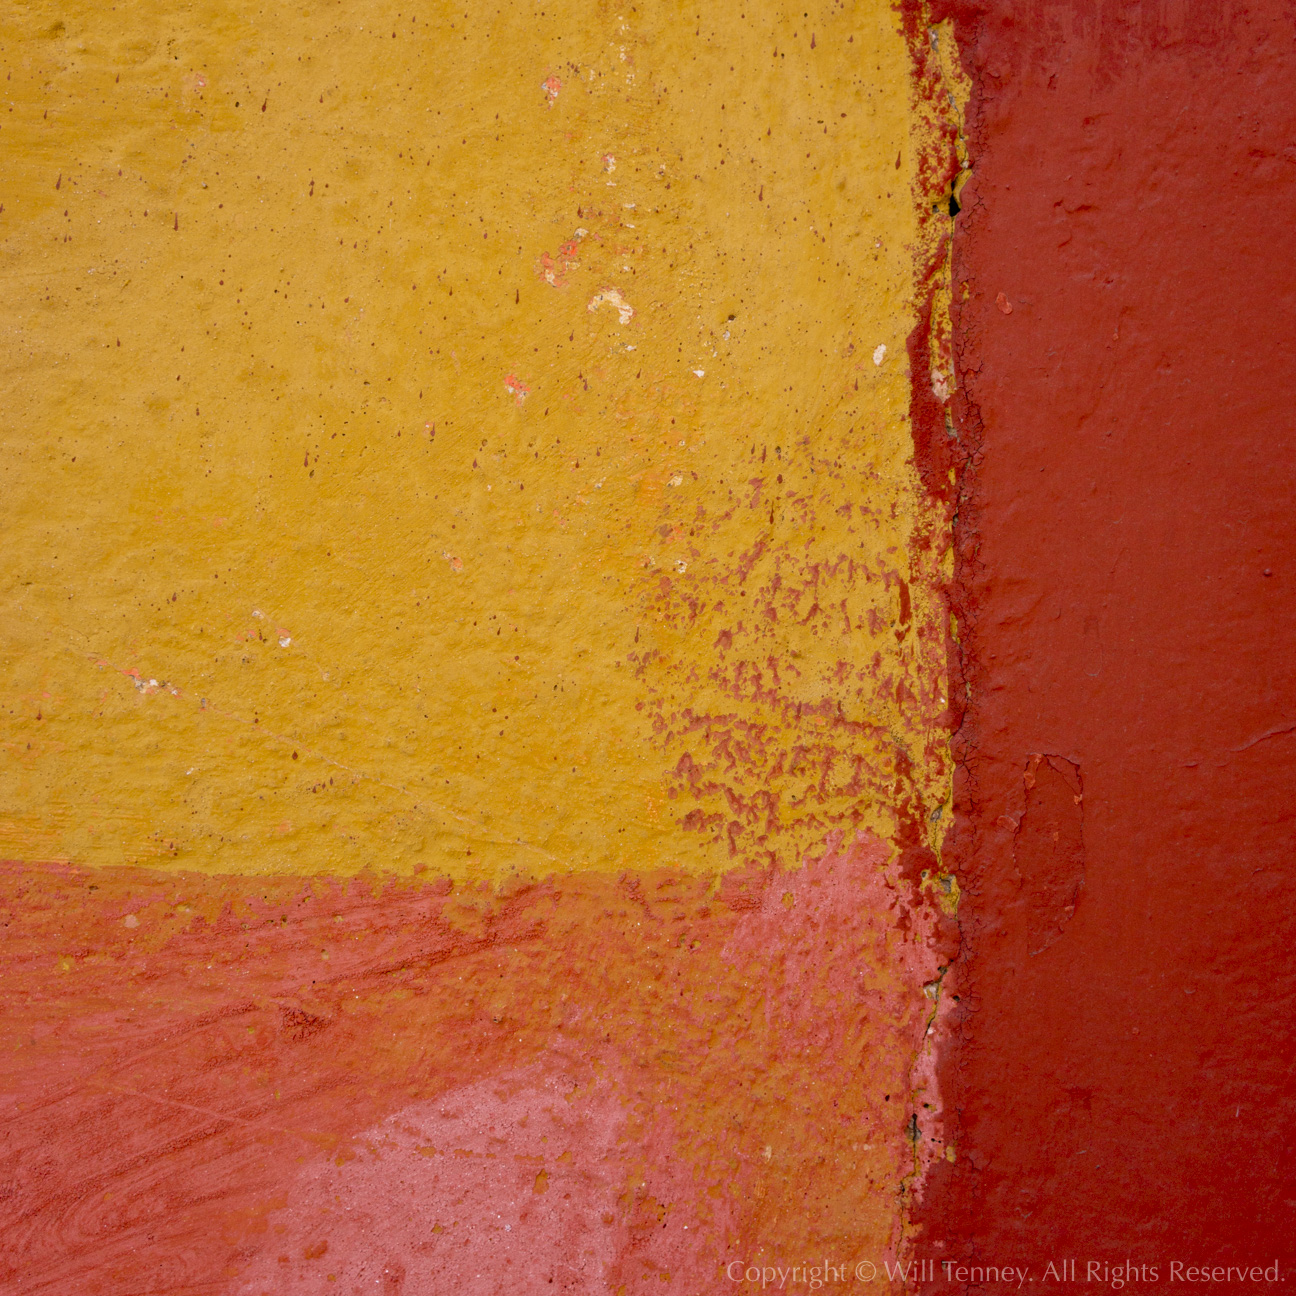 Neighboring Colors #2: Photograph by Will Tenney